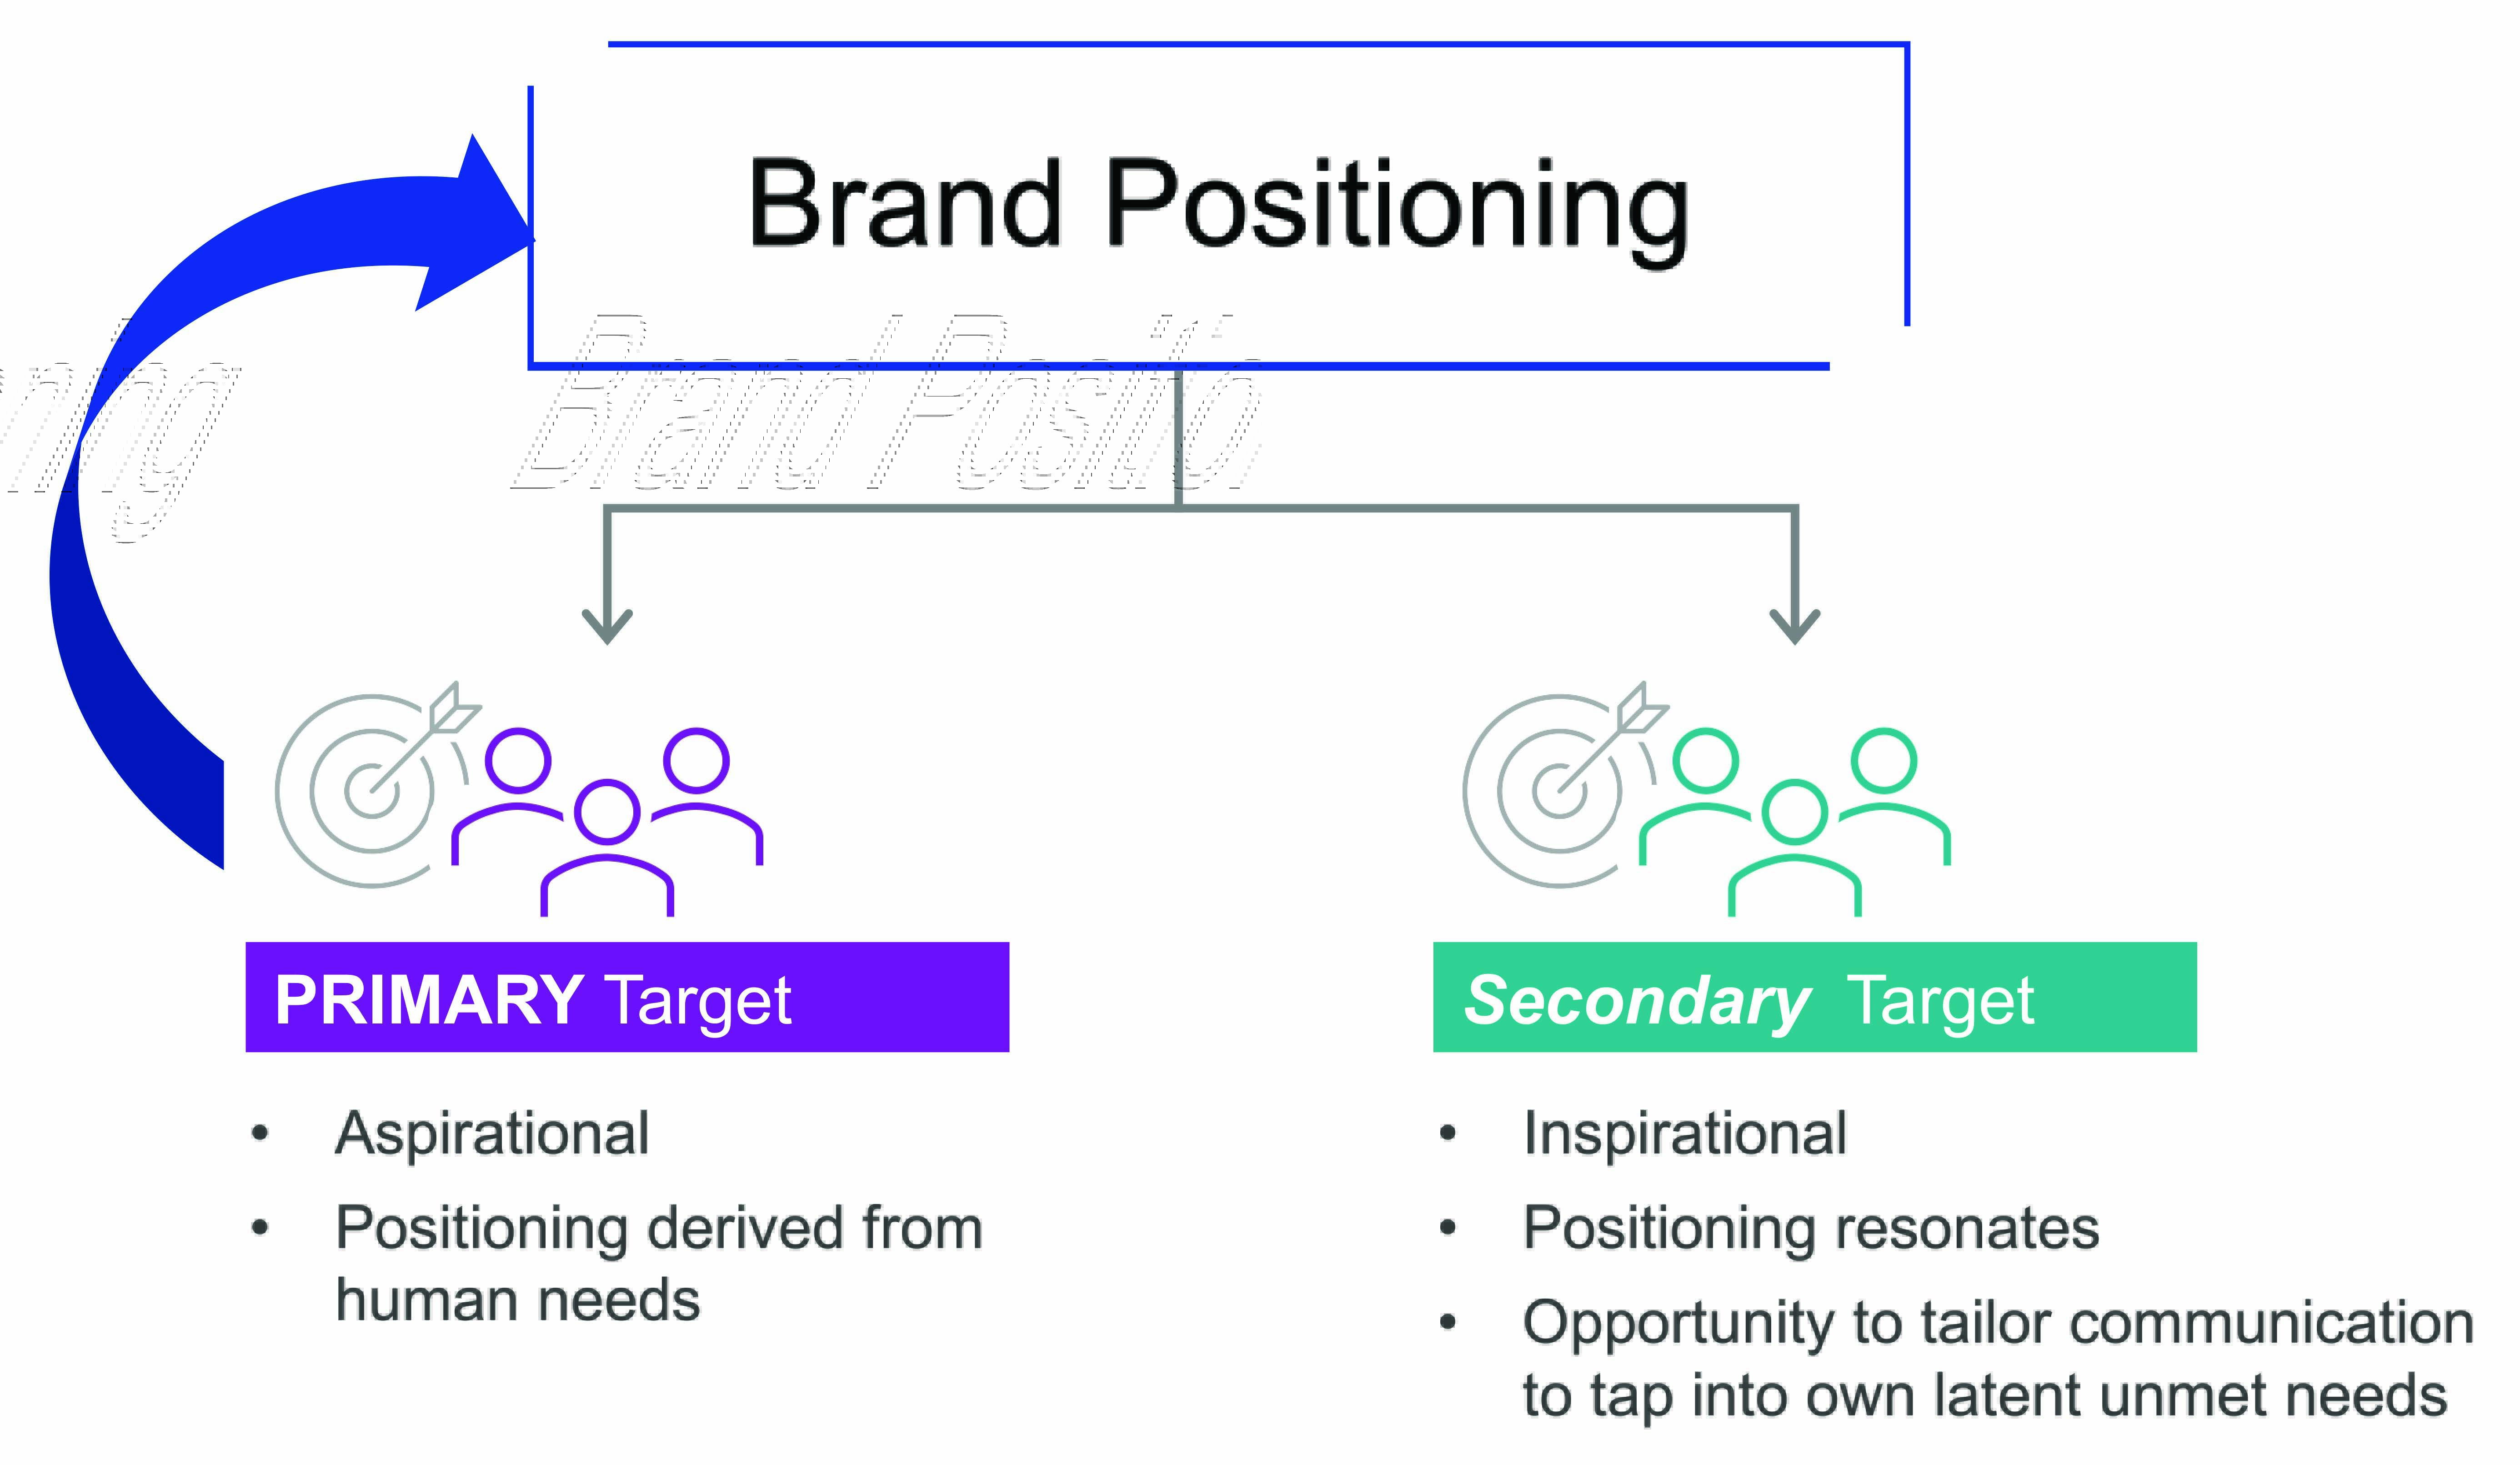 Brand positioning for primary and secondary targets